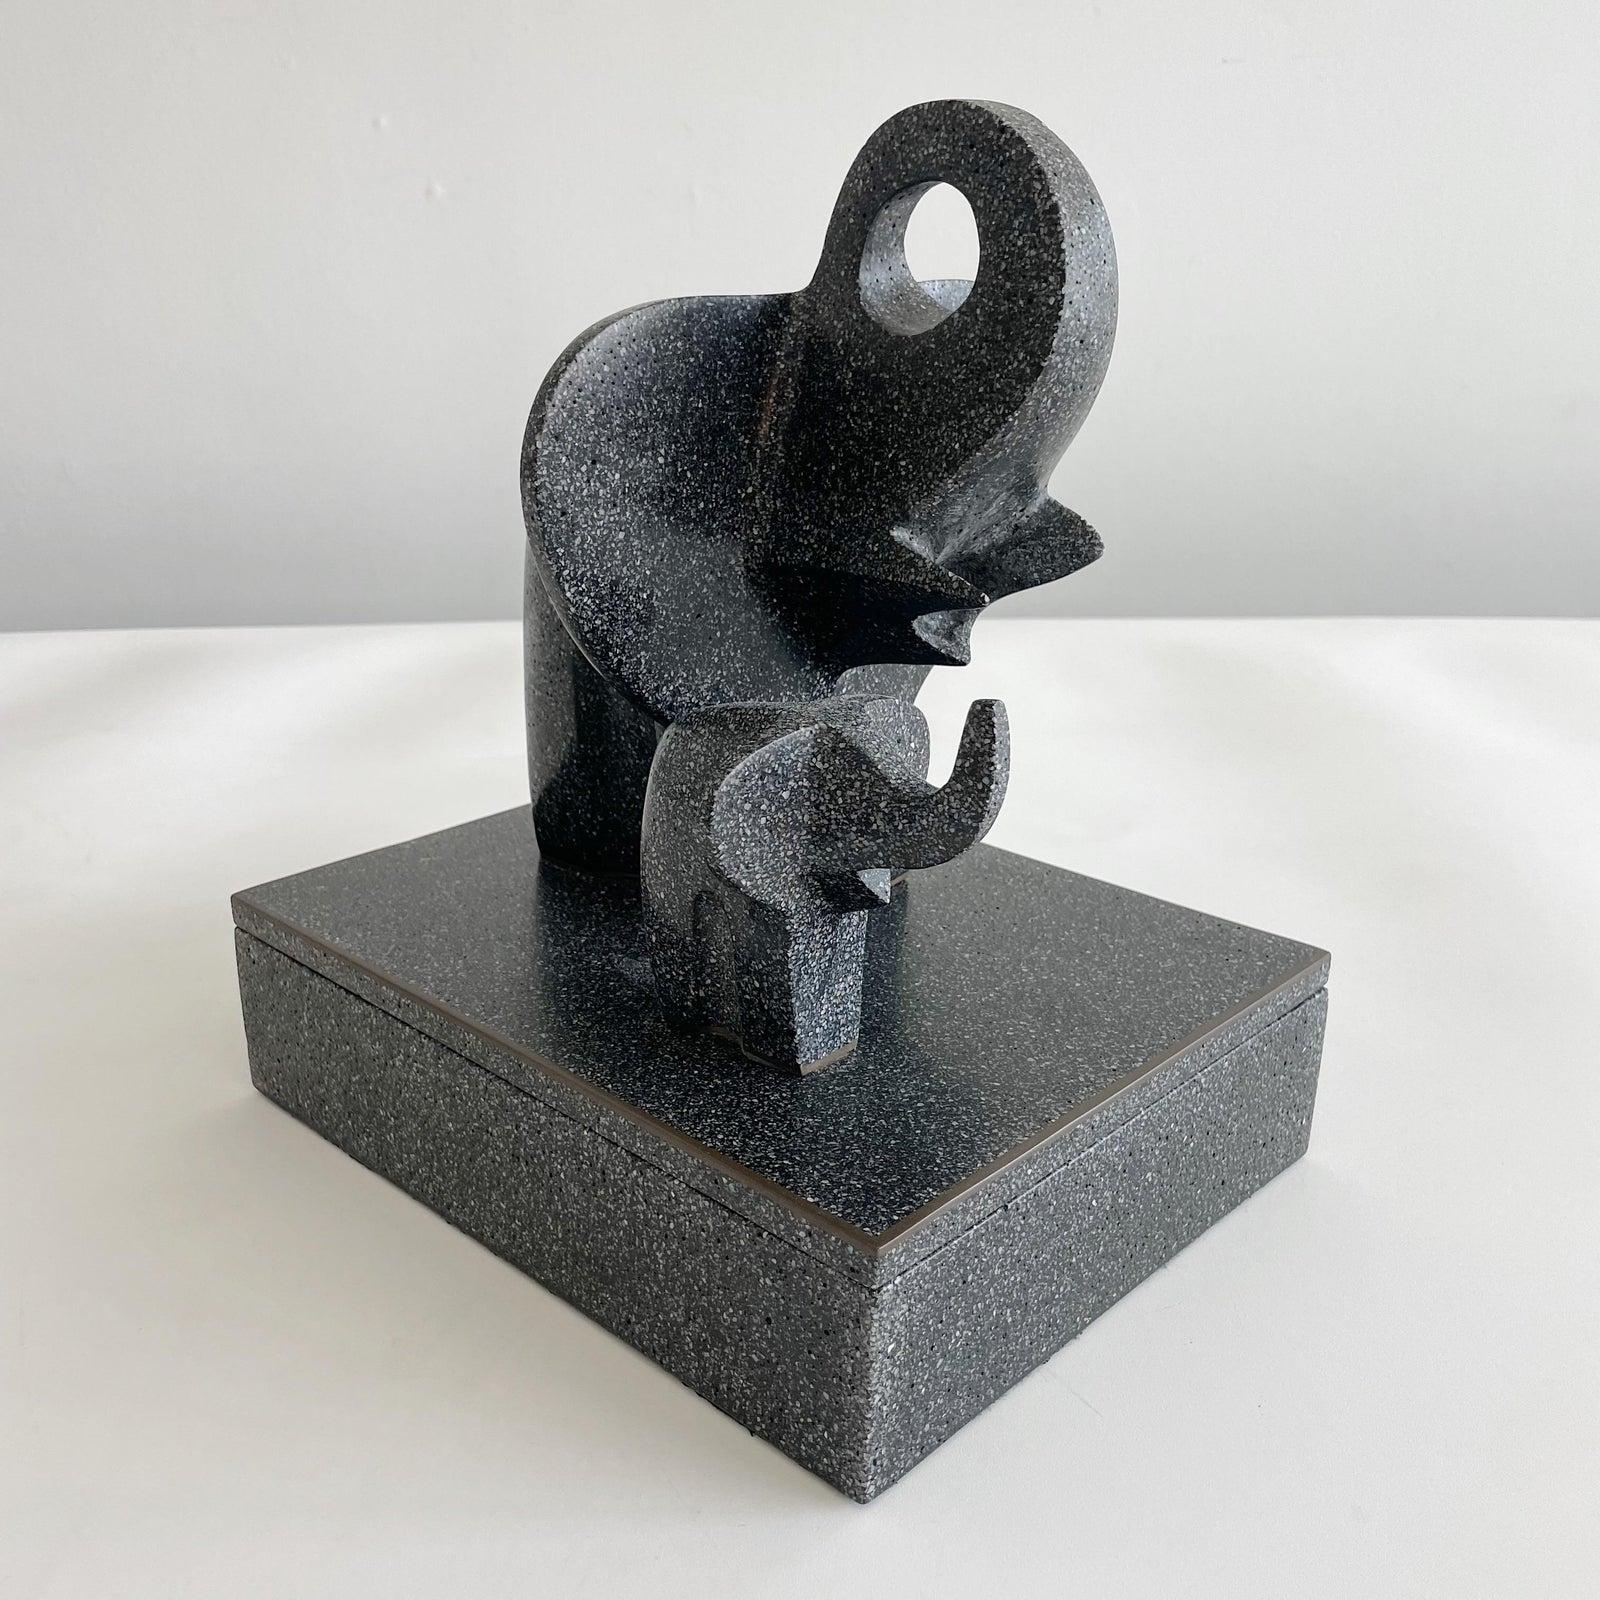 Vintage cast granite with bronze inlay, sculpture box of an elephant and baby elephant by the well-known artist Masatoyo Kishi, known as Kuki residing in San Fransisco California. Signed and numbered 6/200.